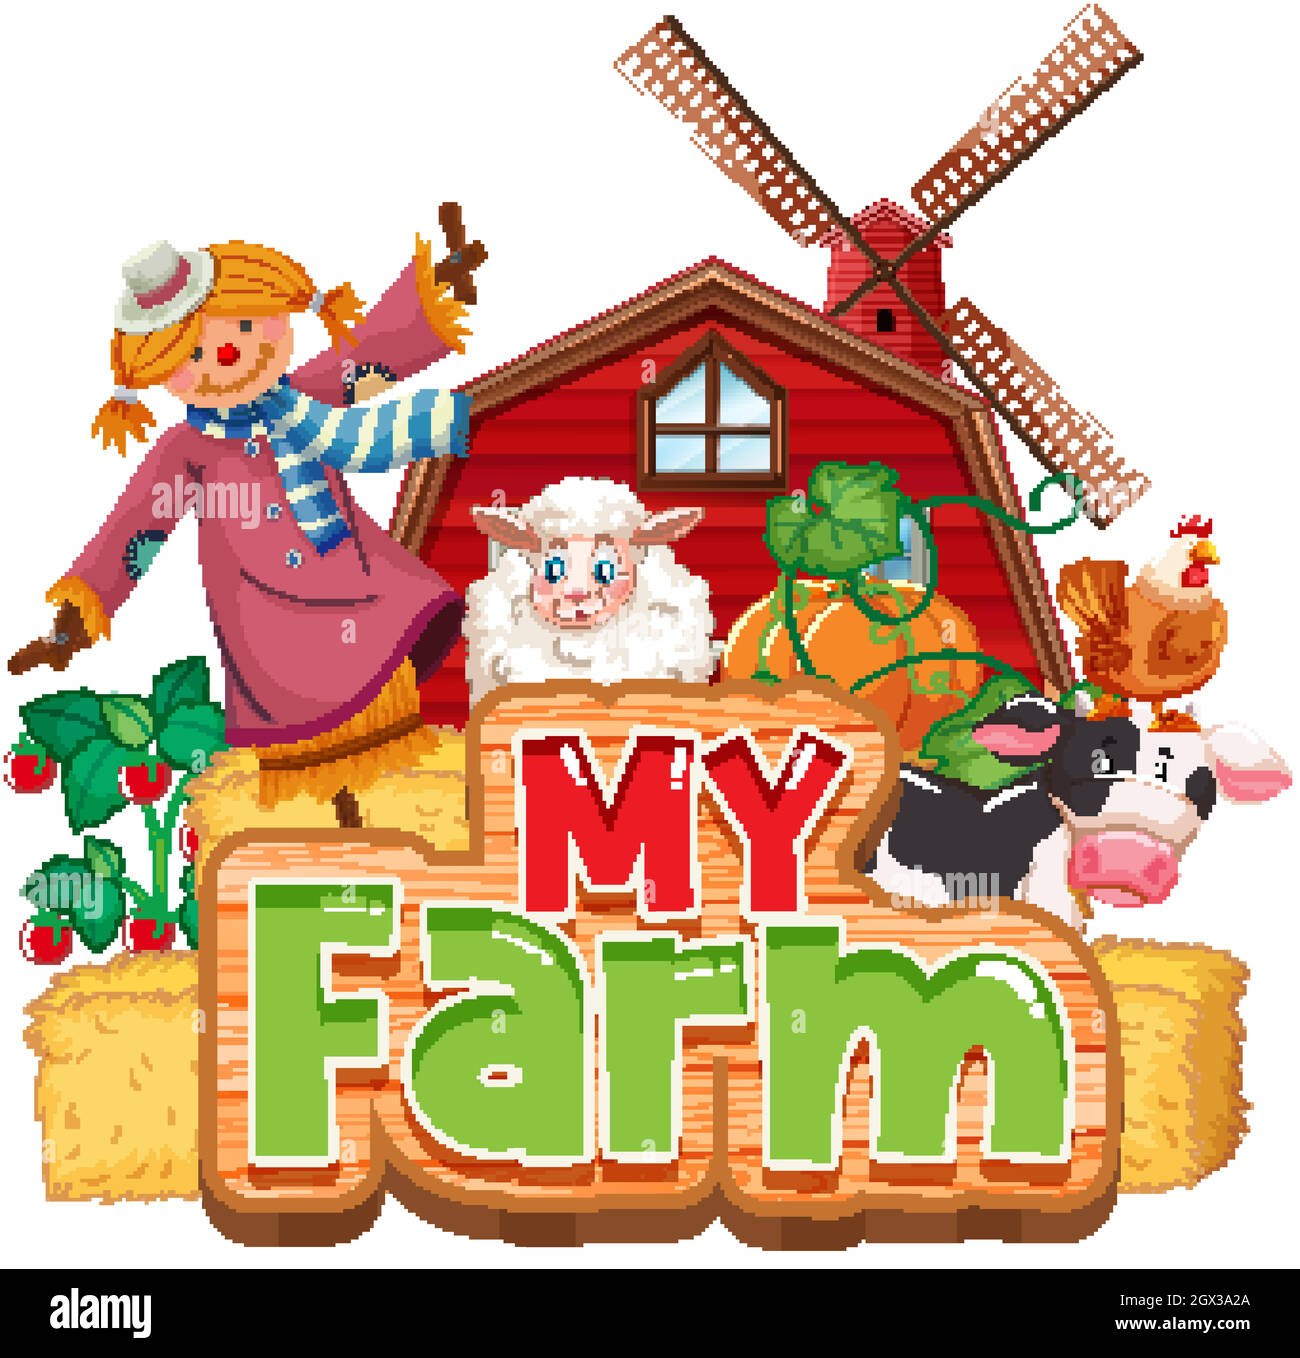 Font design for word my farm with animals and vegetables Stock Vector